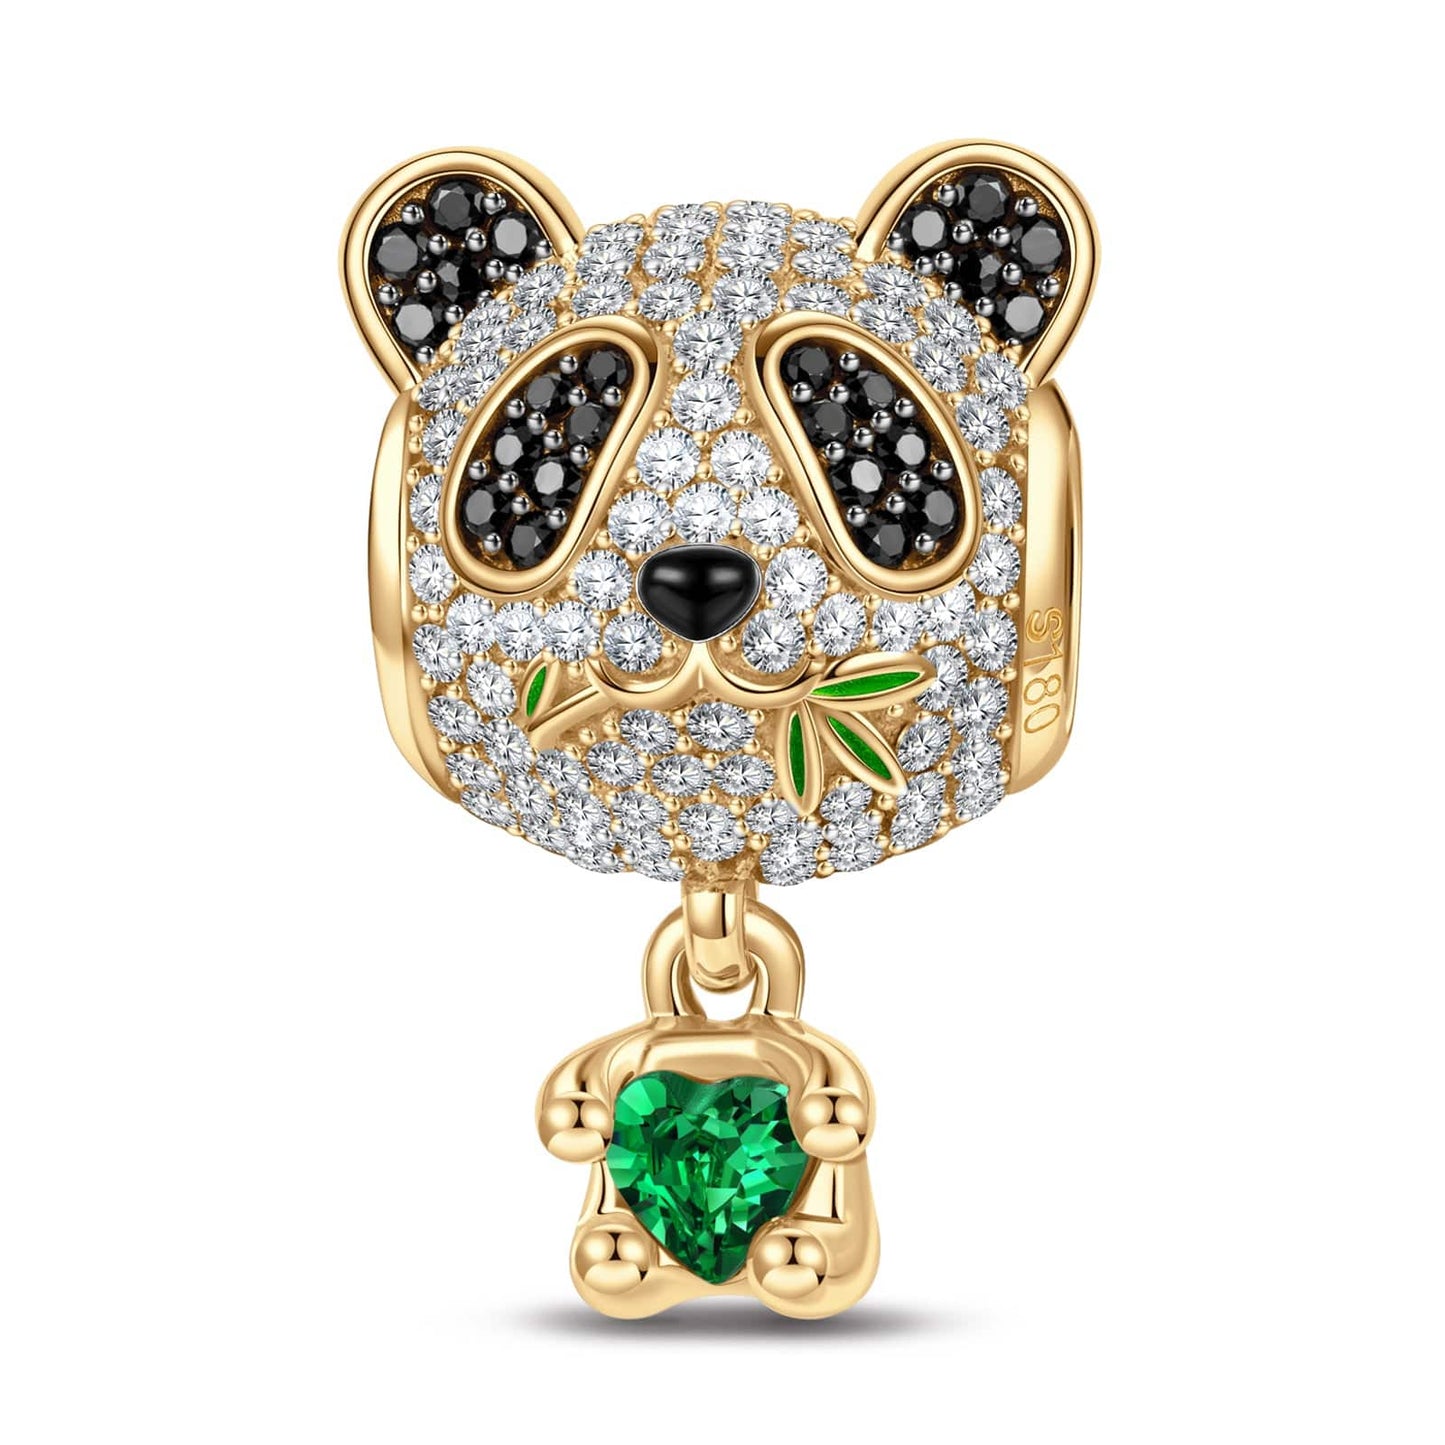 Love Hug Panda Tarnish-resistant Silver Animal Charms With Enamel In 14K Gold Plated - Heartful Hugs Collection